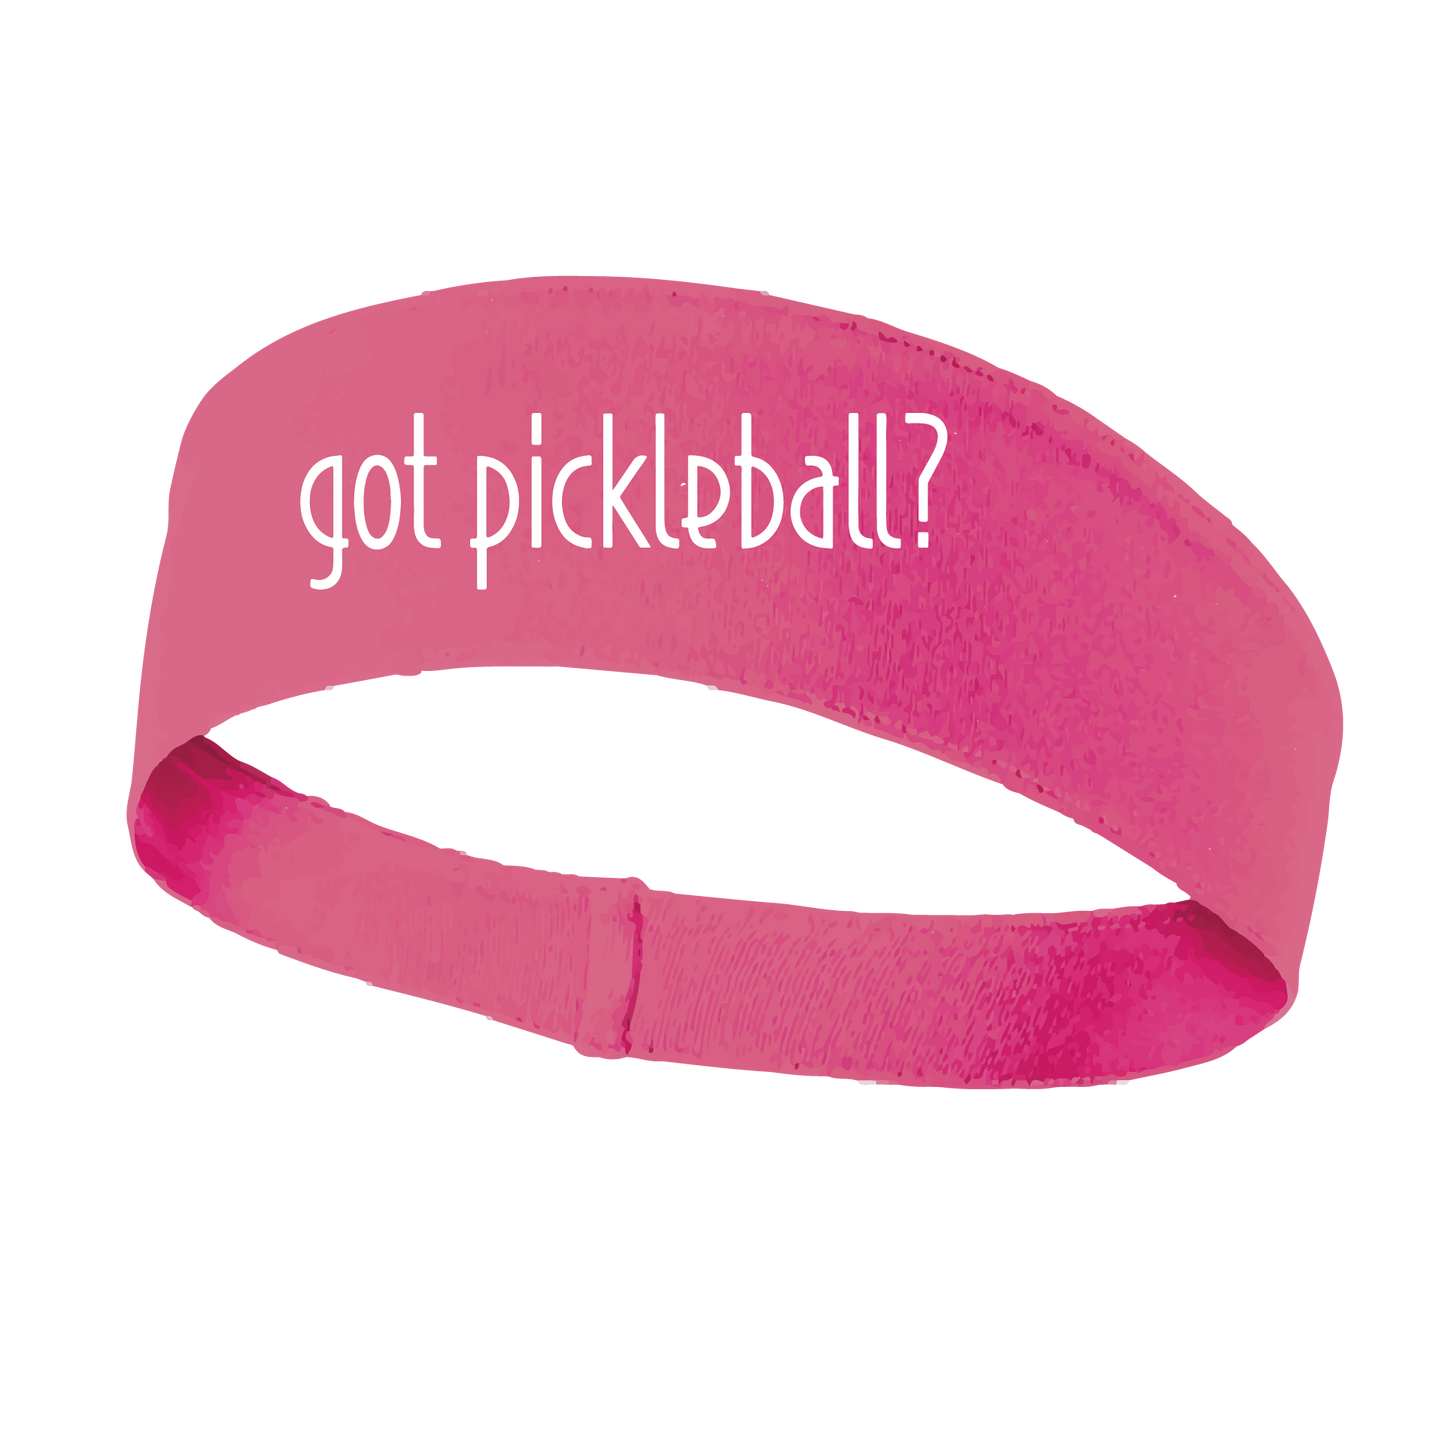 Design: Got Pickleball?  This fun, pickleball designed, moisture-wicking headband narrows in the back to fit more securely. Single-needle top-stitched edging. These headbands come in a variety of colors. Truly shows your love for the sport of pickleball!!